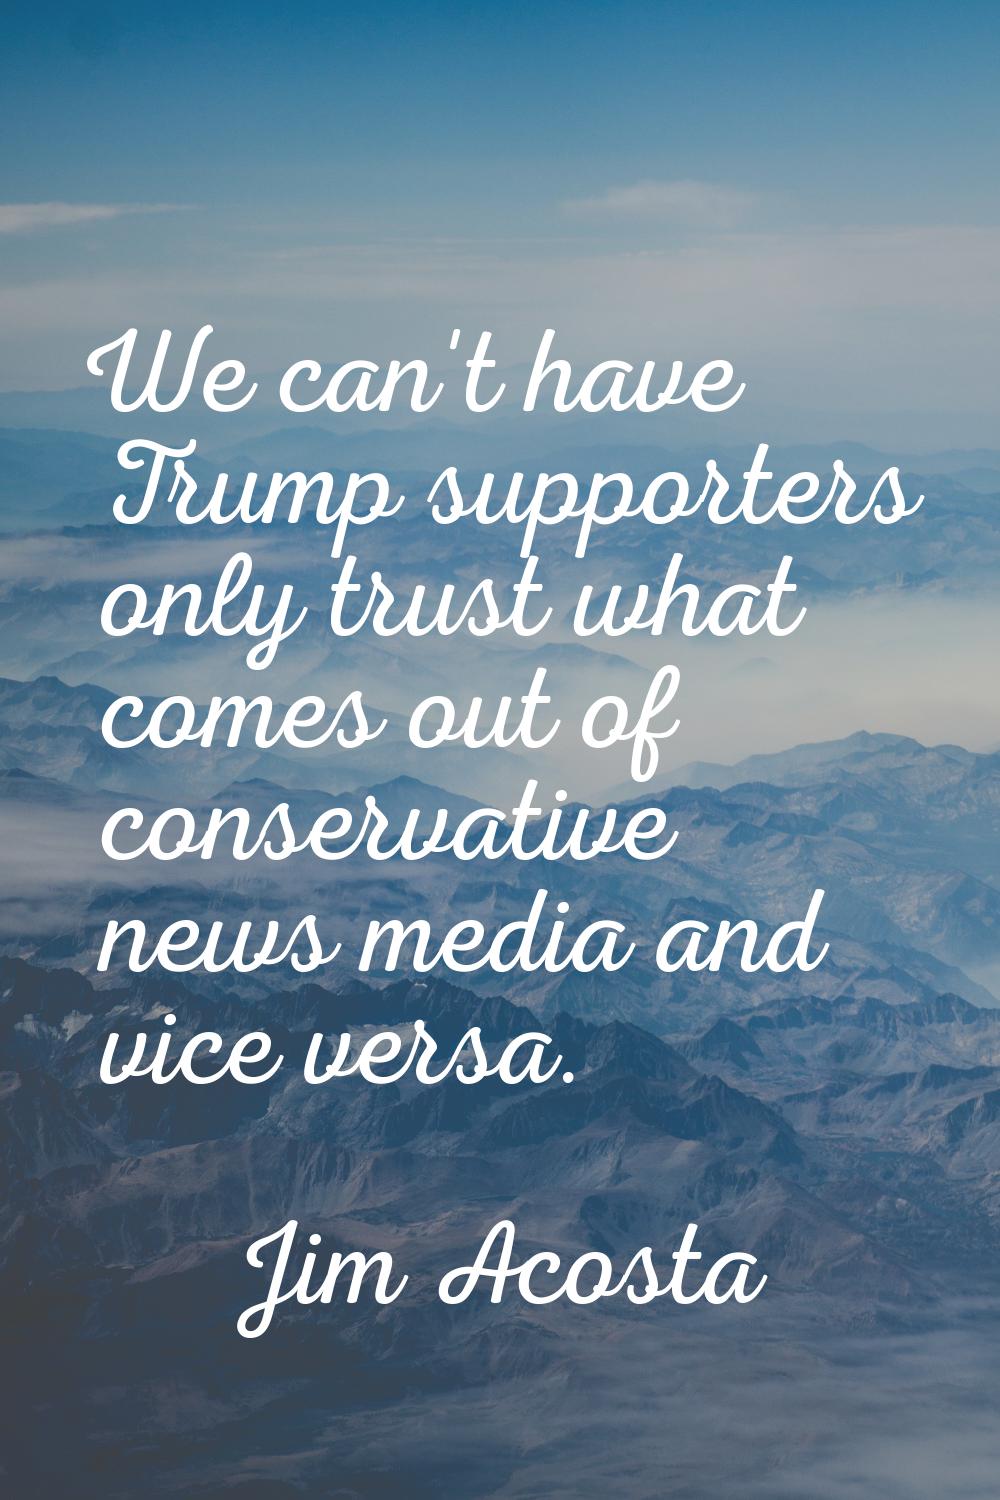 We can't have Trump supporters only trust what comes out of conservative news media and vice versa.